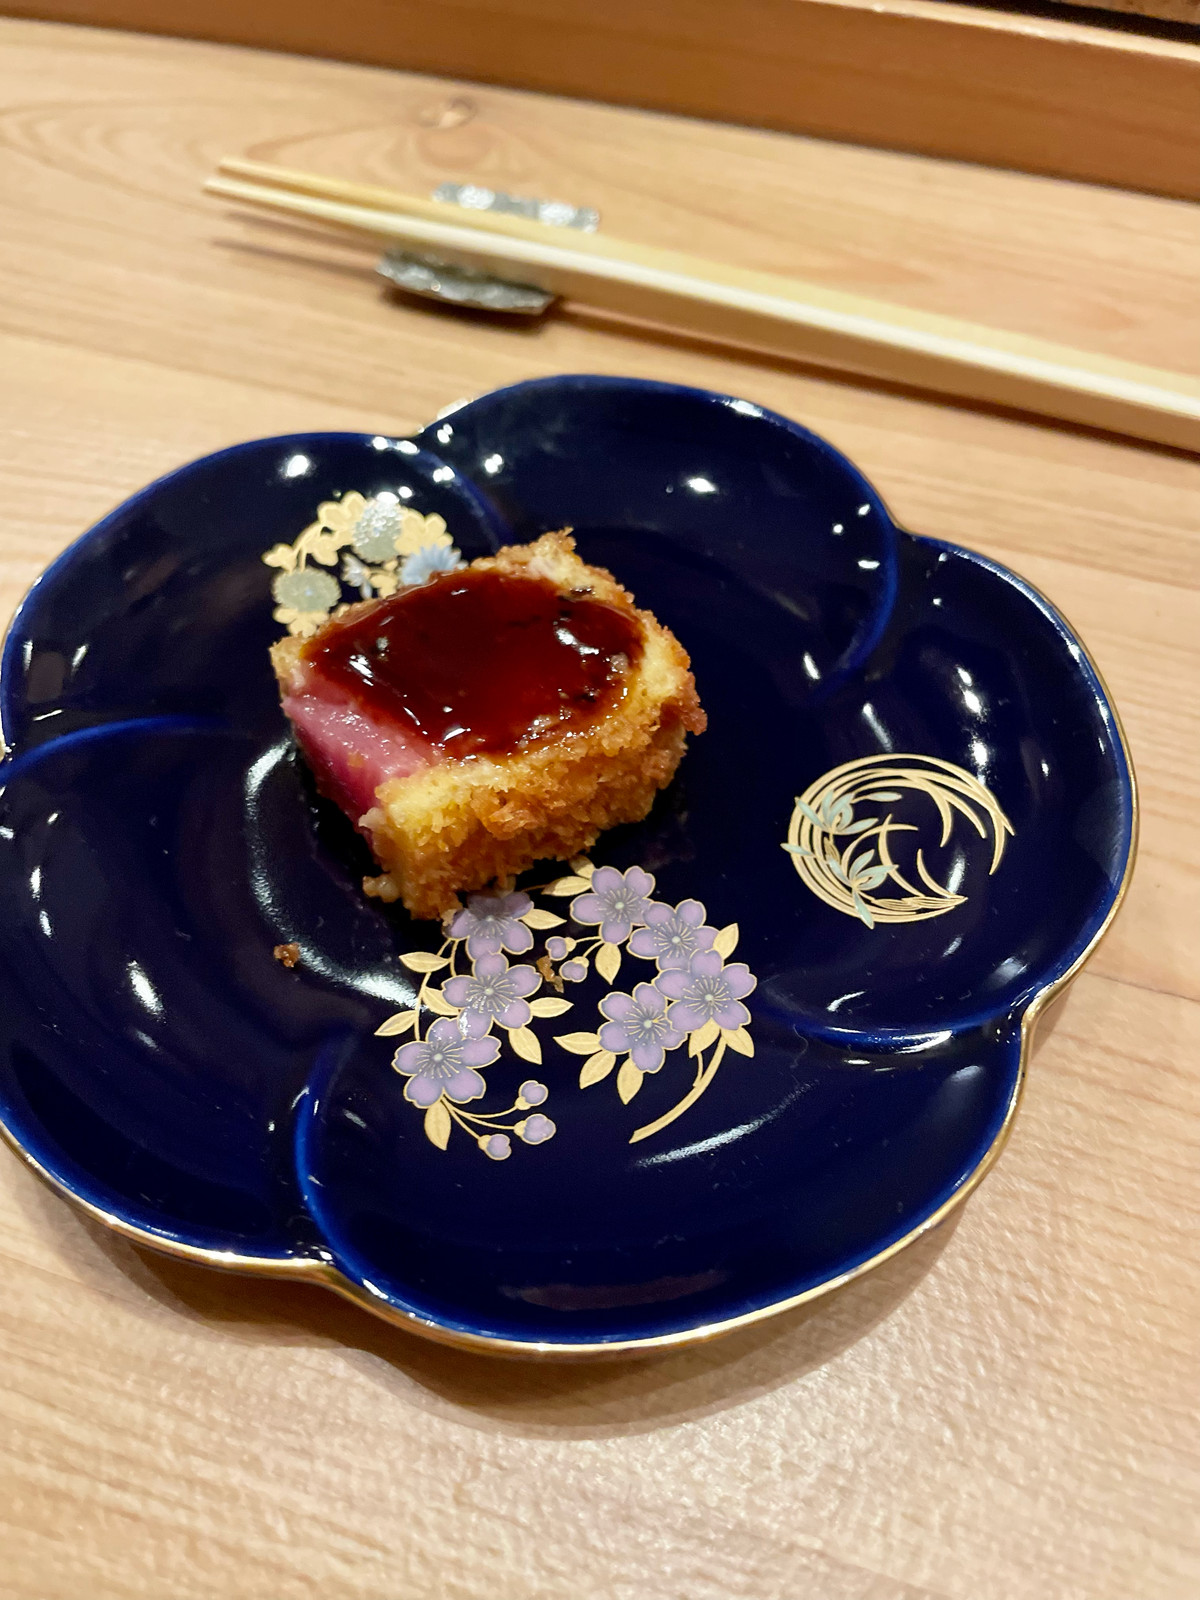 On a navy plate with gold and purple flowers, a piece of toro that has been crusted in Panko and fried, then topped with a sauce, sits.